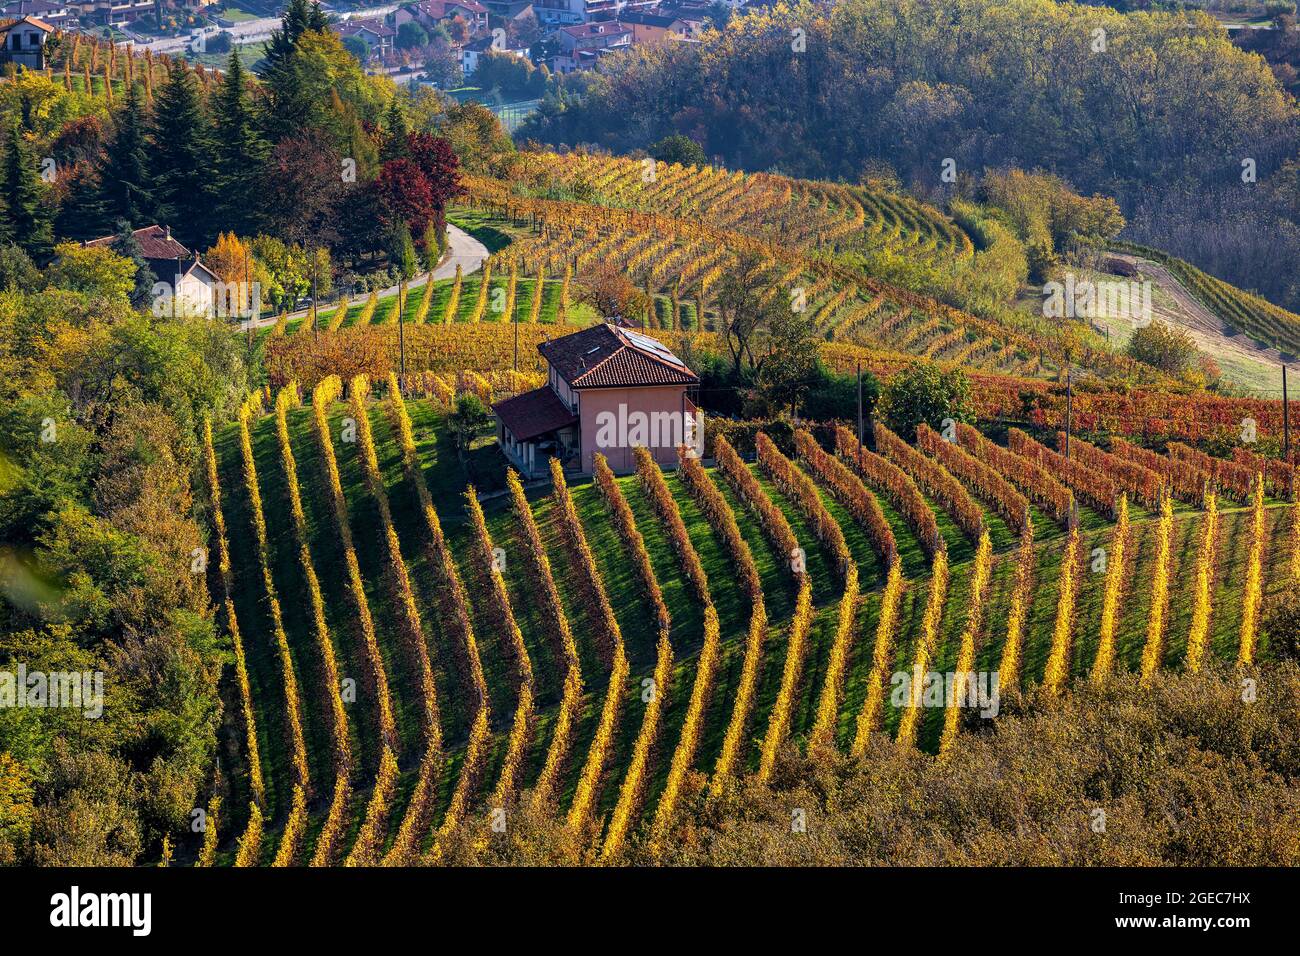 Rural house on the hill among colorful autumnal vineyards in Piedmont, Northern Italy. Stock Photo